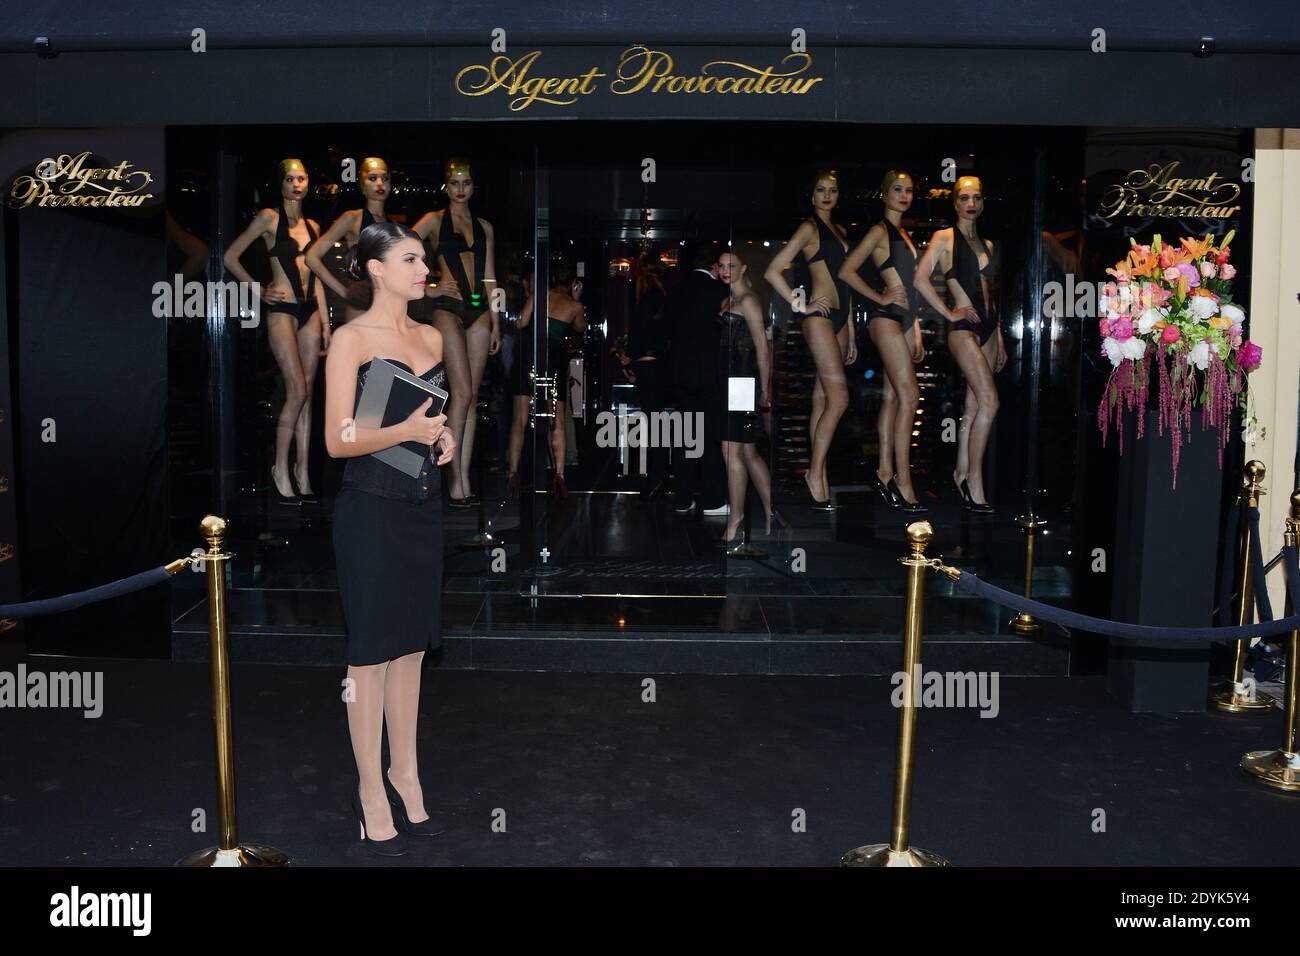 Agent Provocateur' store opening in as part of the 66th film festival in Cannes, France on May 17, 2013. Photo by Laurene Favier/ABACAPRESS.COM Stock Alamy